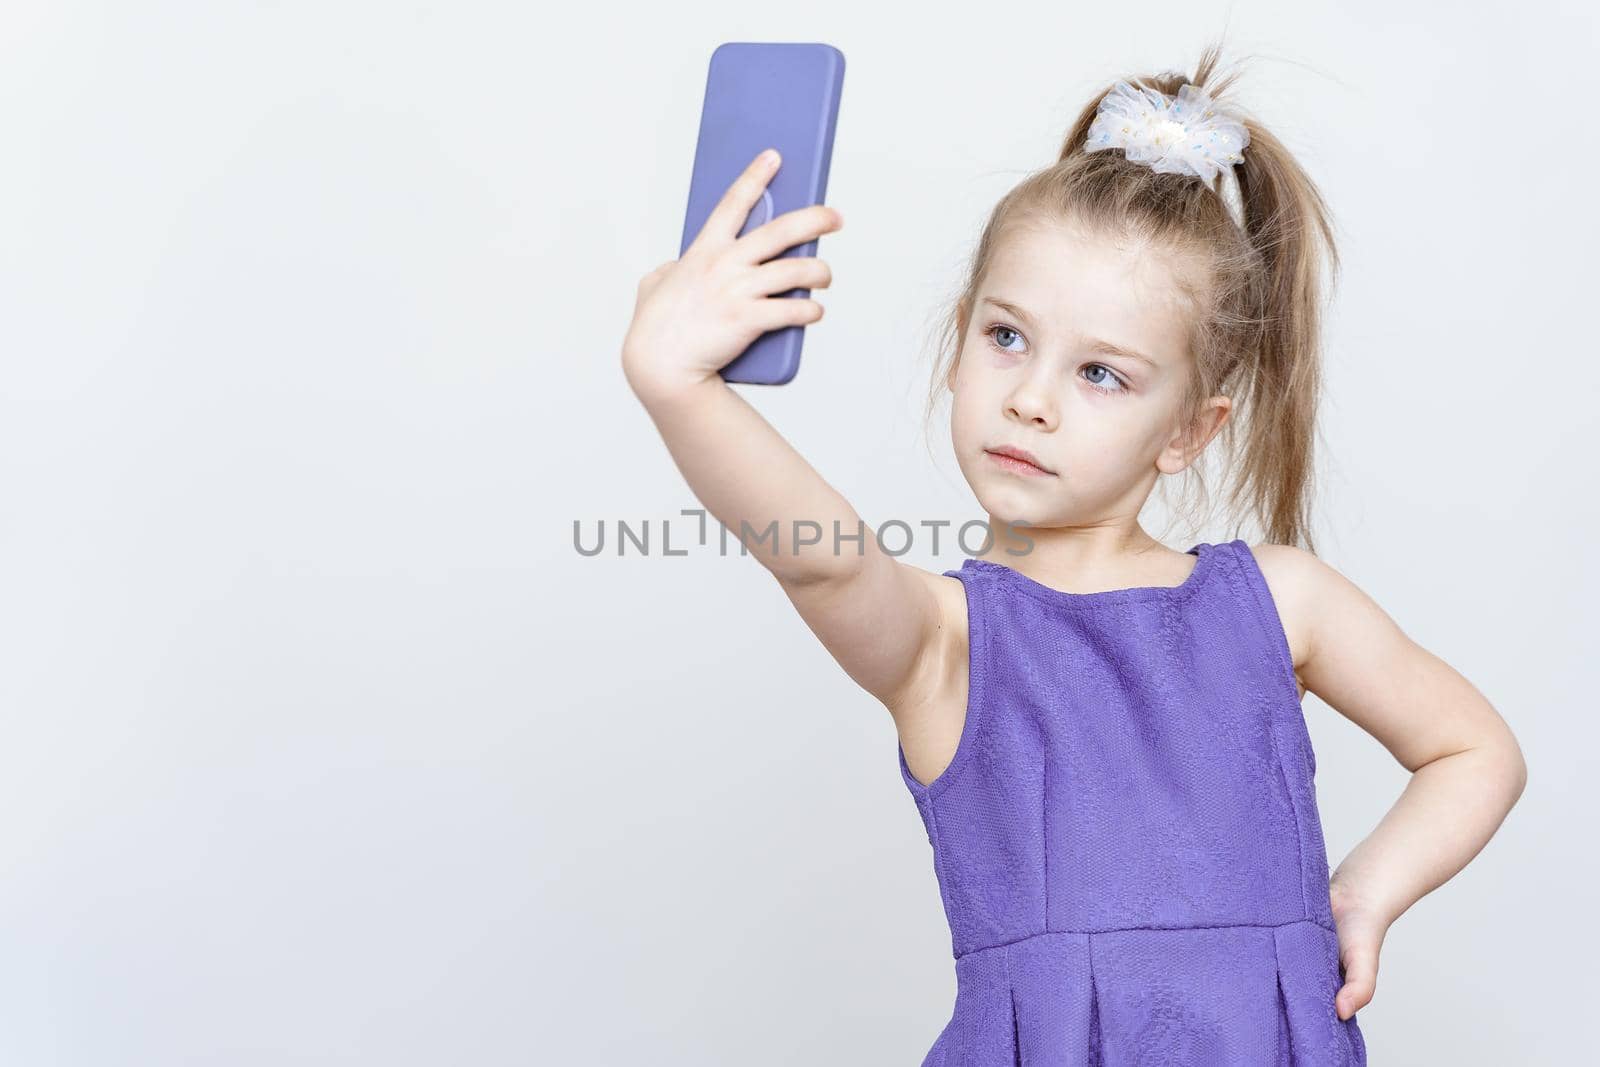 portrait of a cute 5 year old girl with a smartphone on a light background by Lena_Ogurtsova